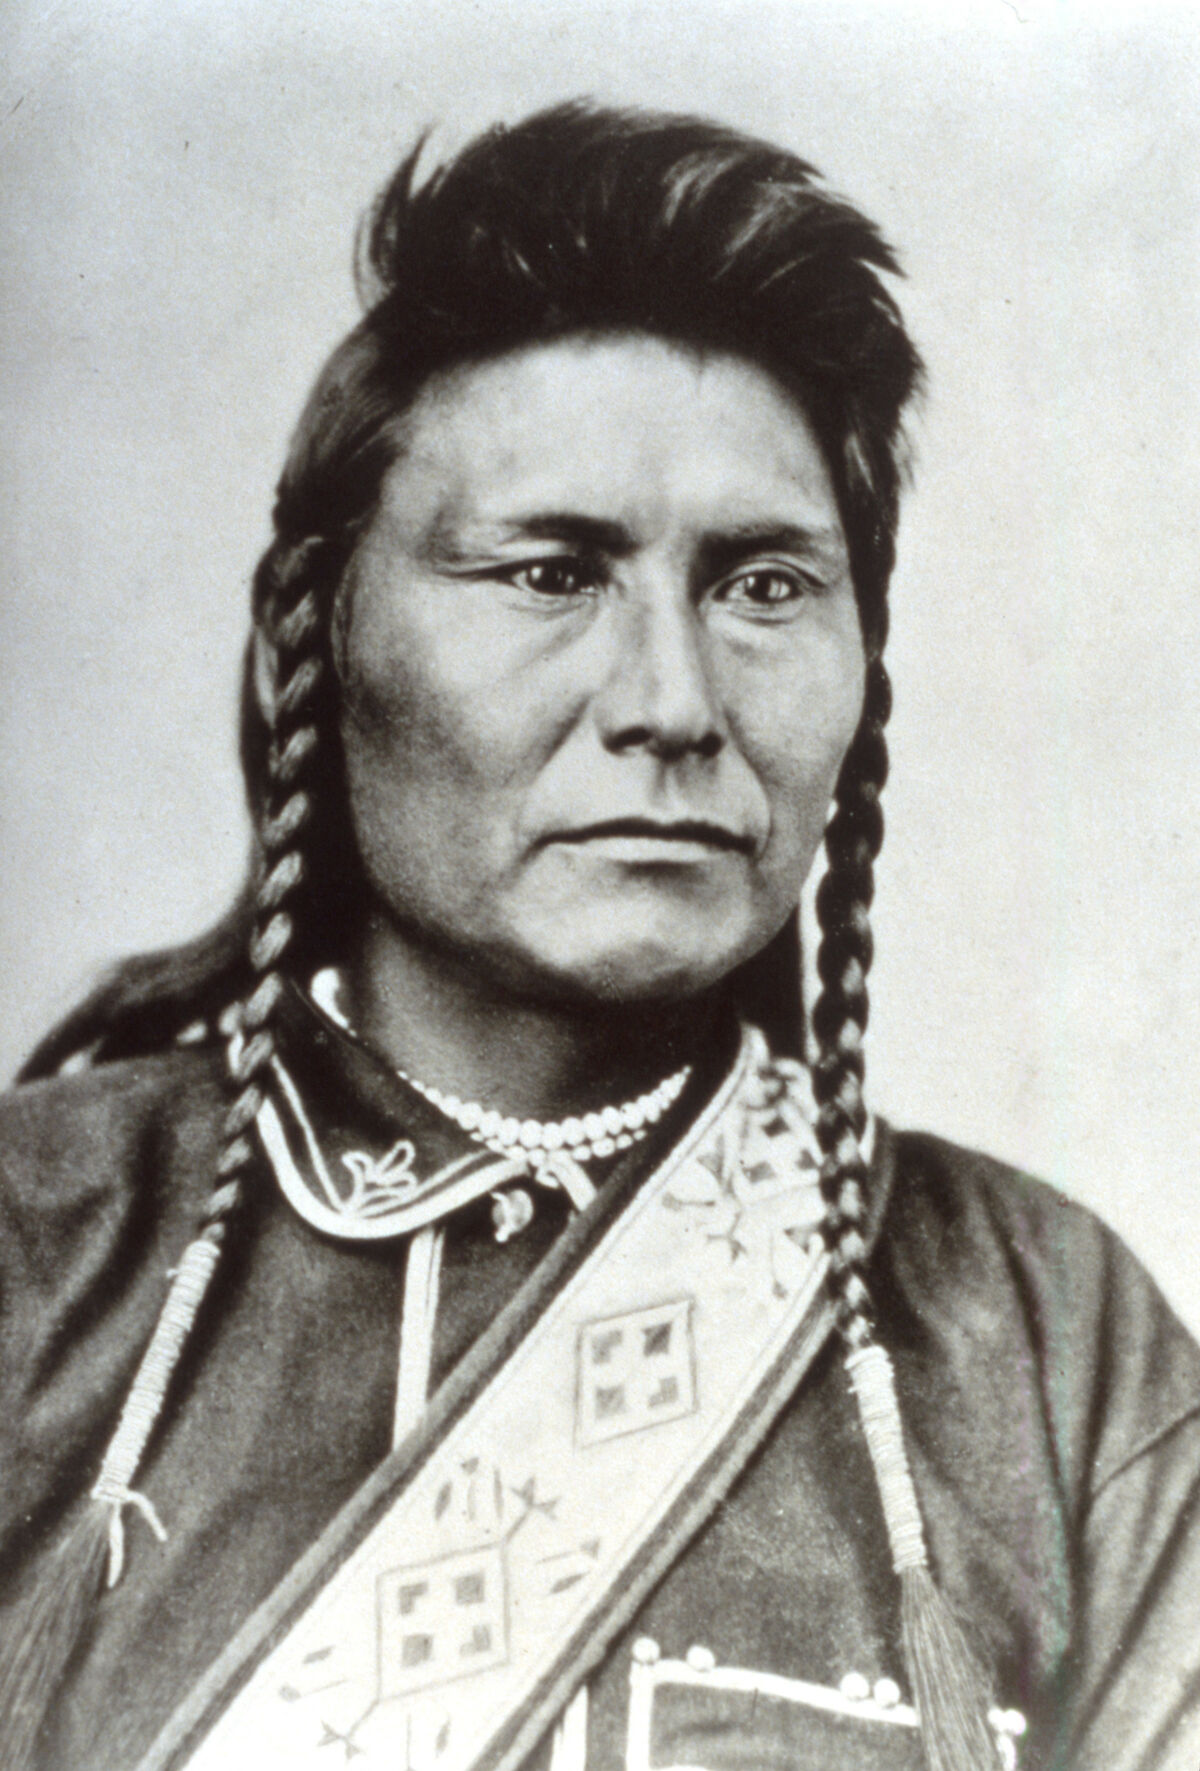 Photo of Young Chief Joseph.